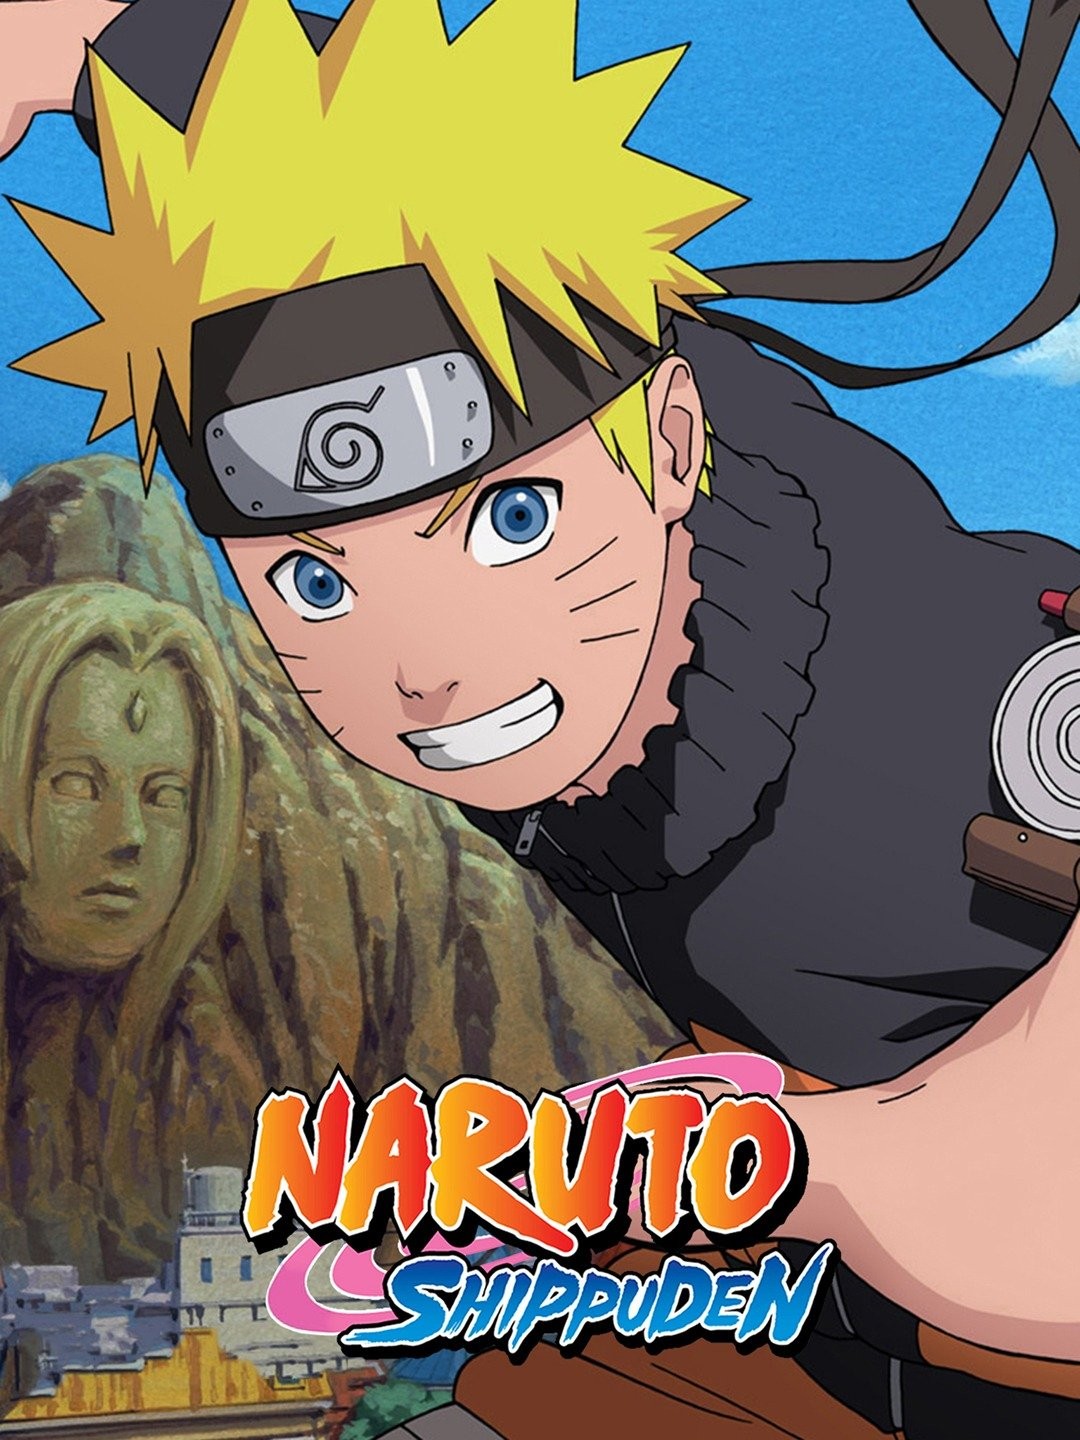 Naruto mobile game account sells the permanent finished product